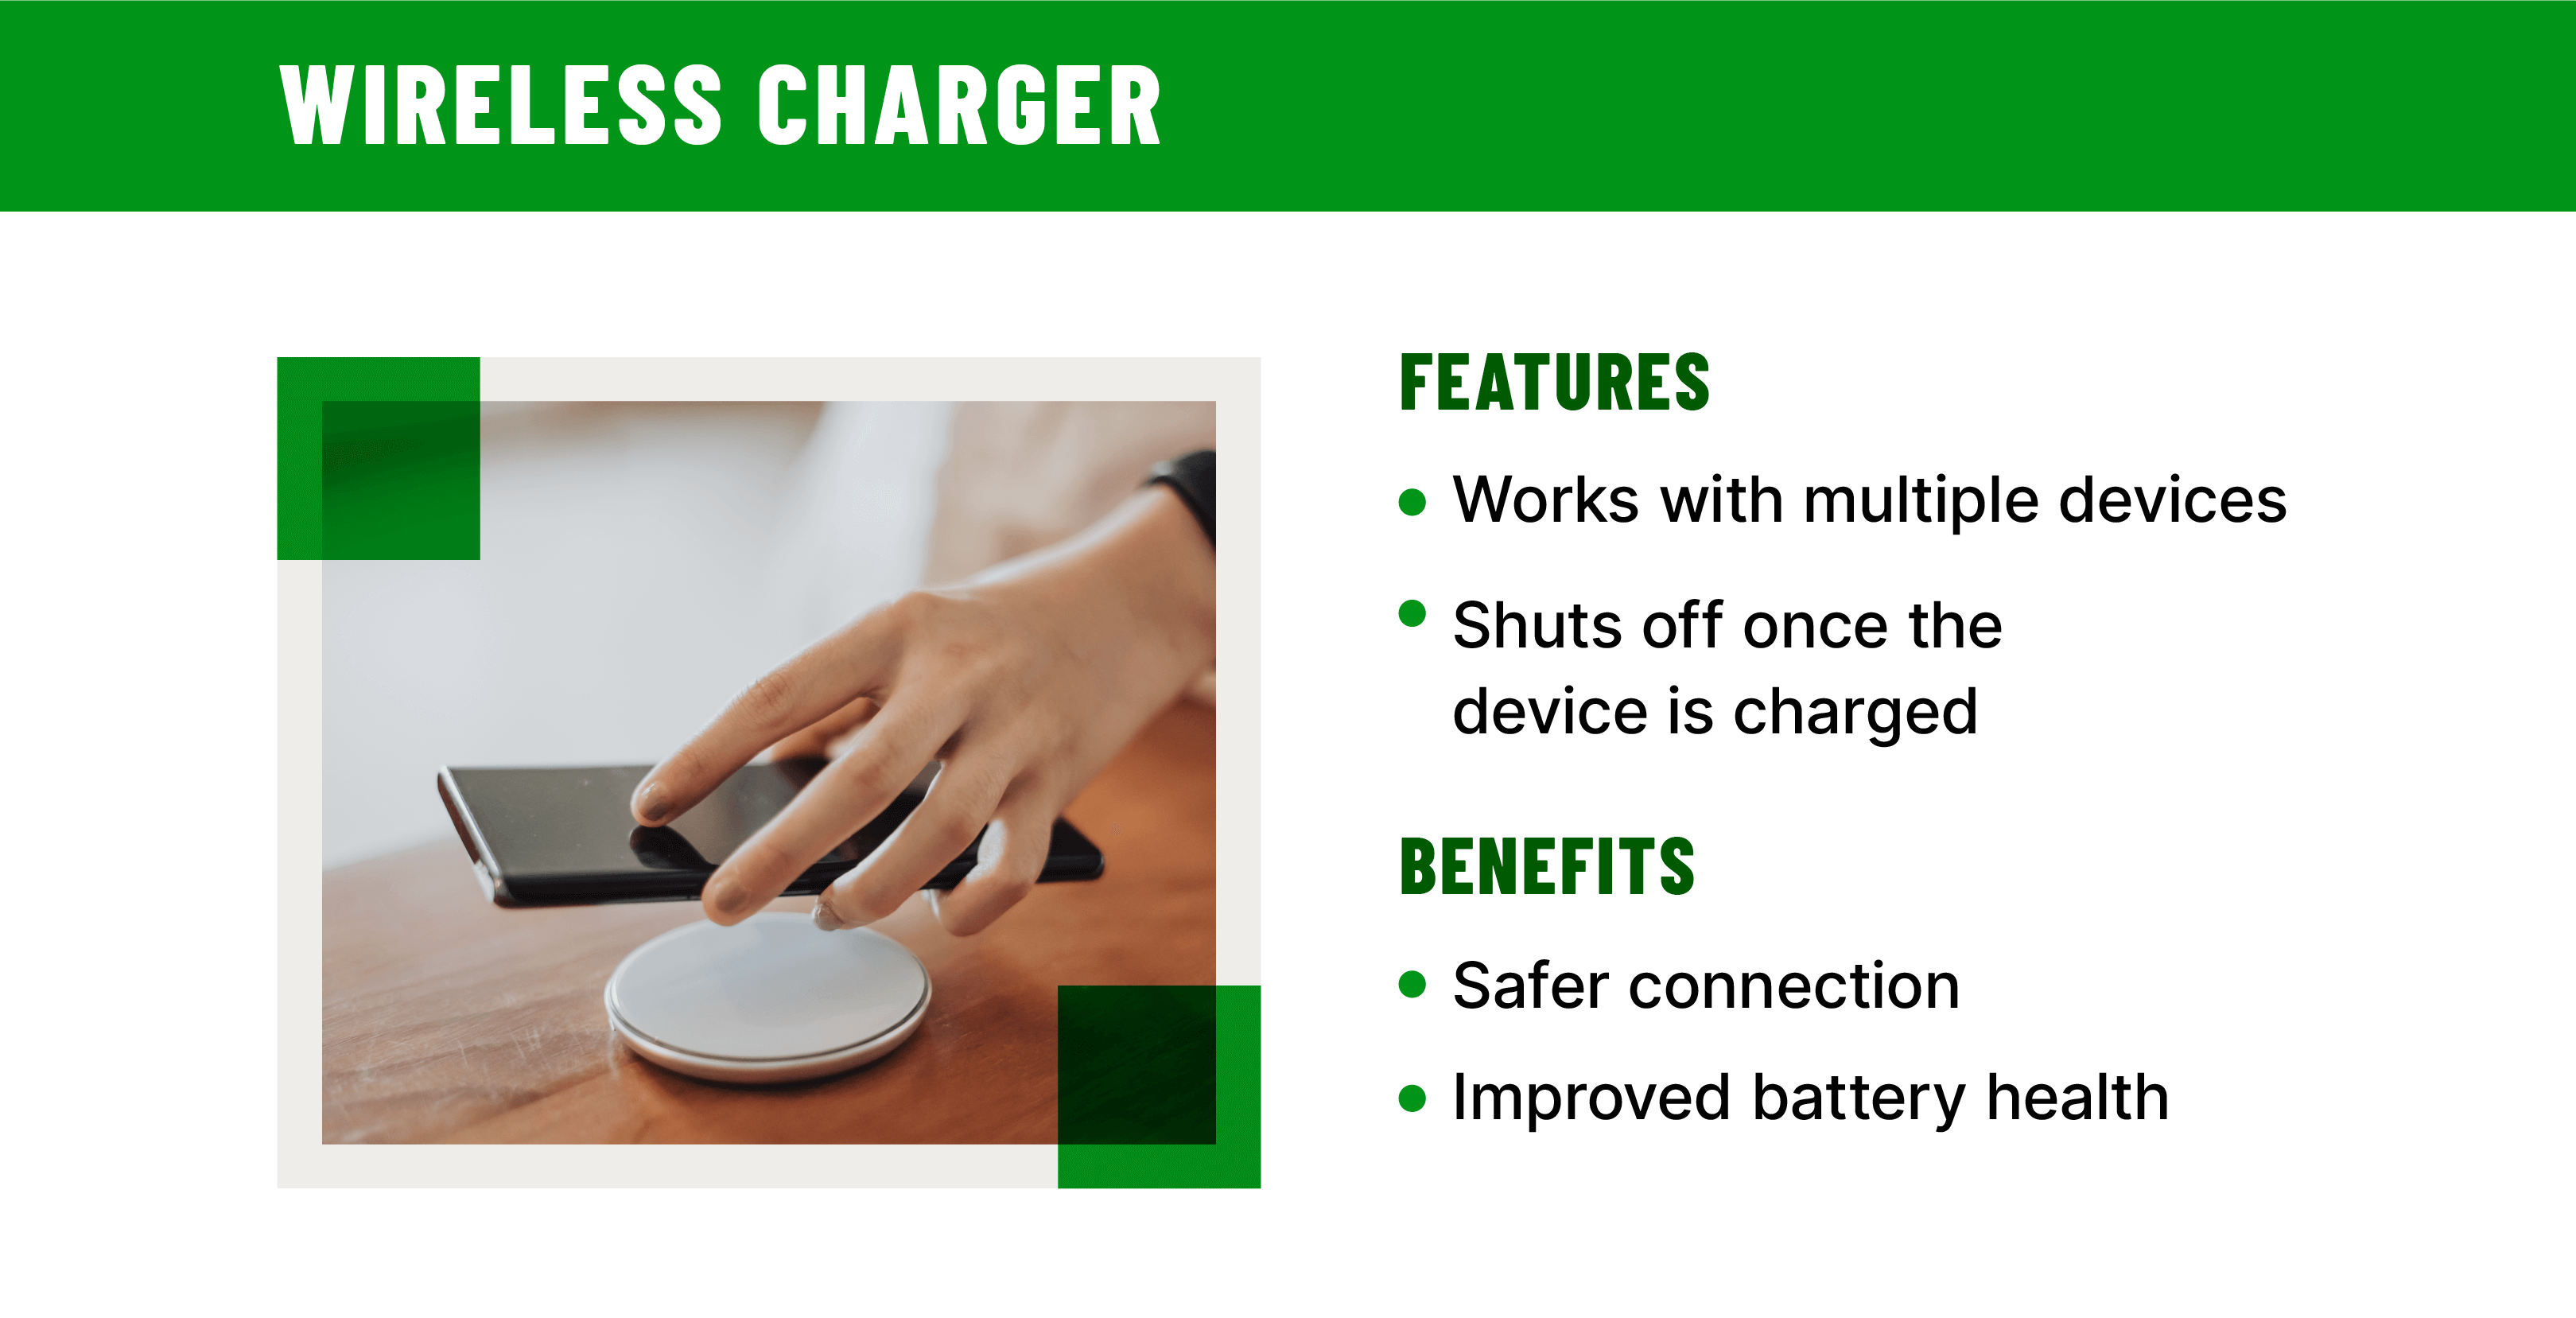 Image of a phone being placed on a wireless charger with text describing the features and benefits